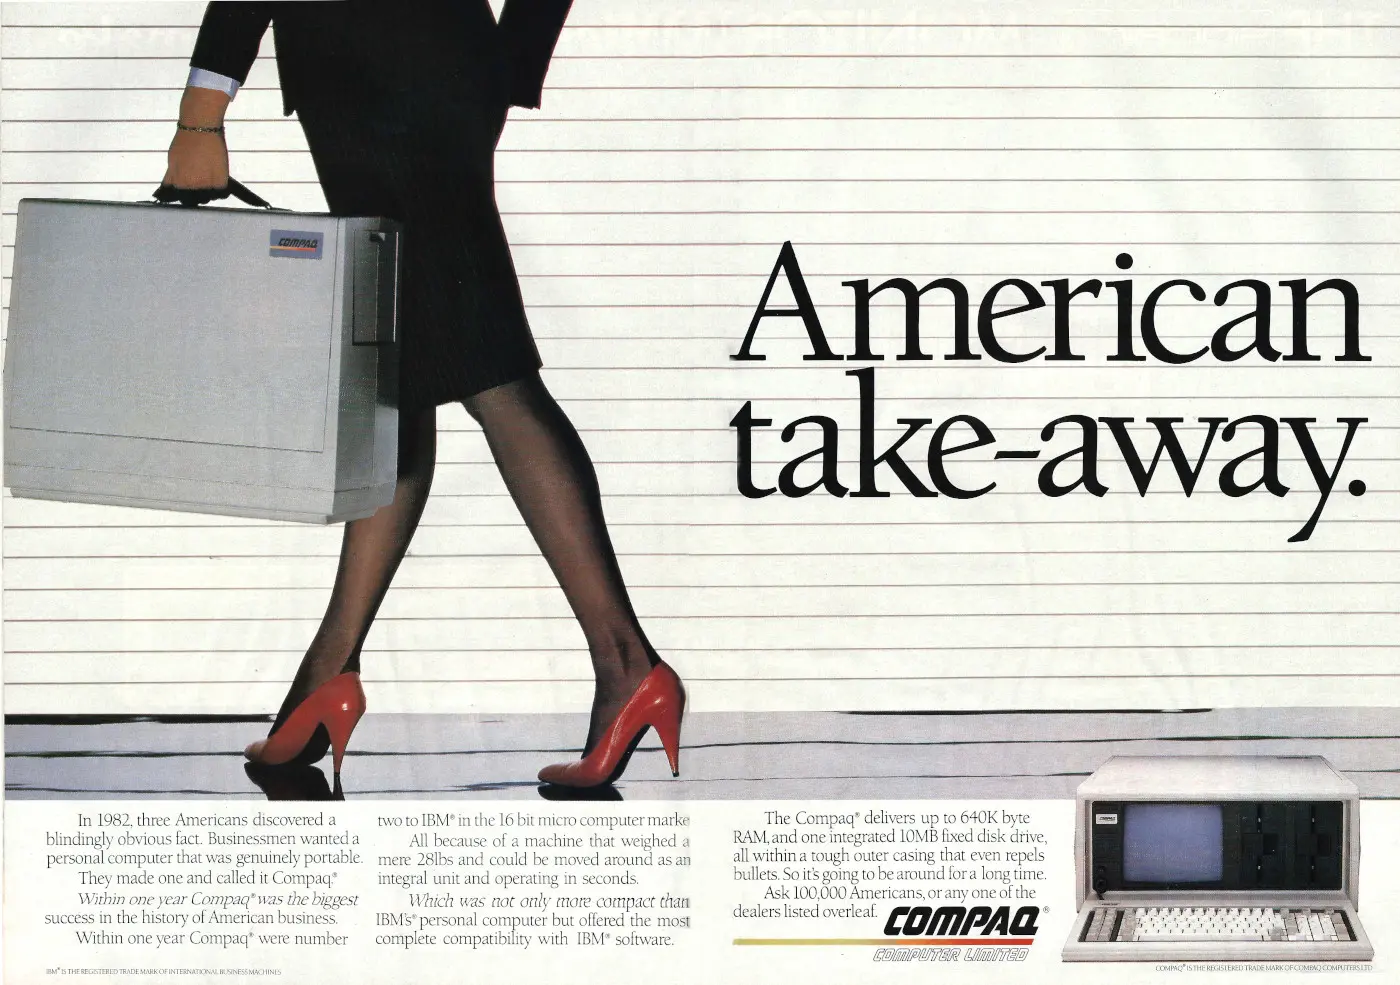 Compaq Advert: American take-away, from Personal Computer World, December 1984